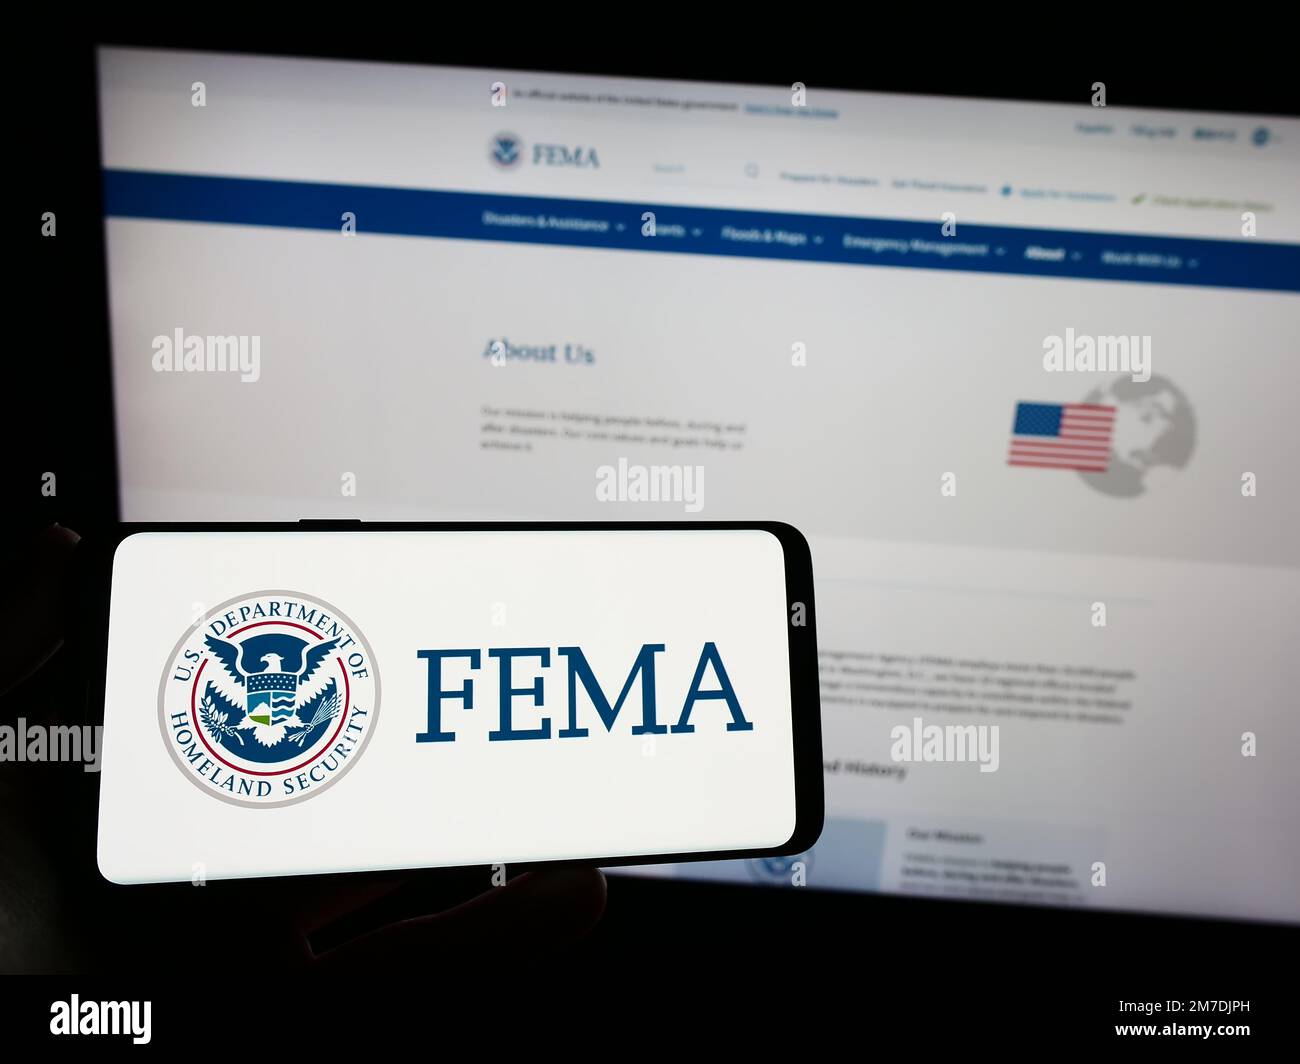 Person holding smartphone with seal of Federal Emergency Management Agency (FEMA) on screen in front of website. Focus on phone display. Stock Photo